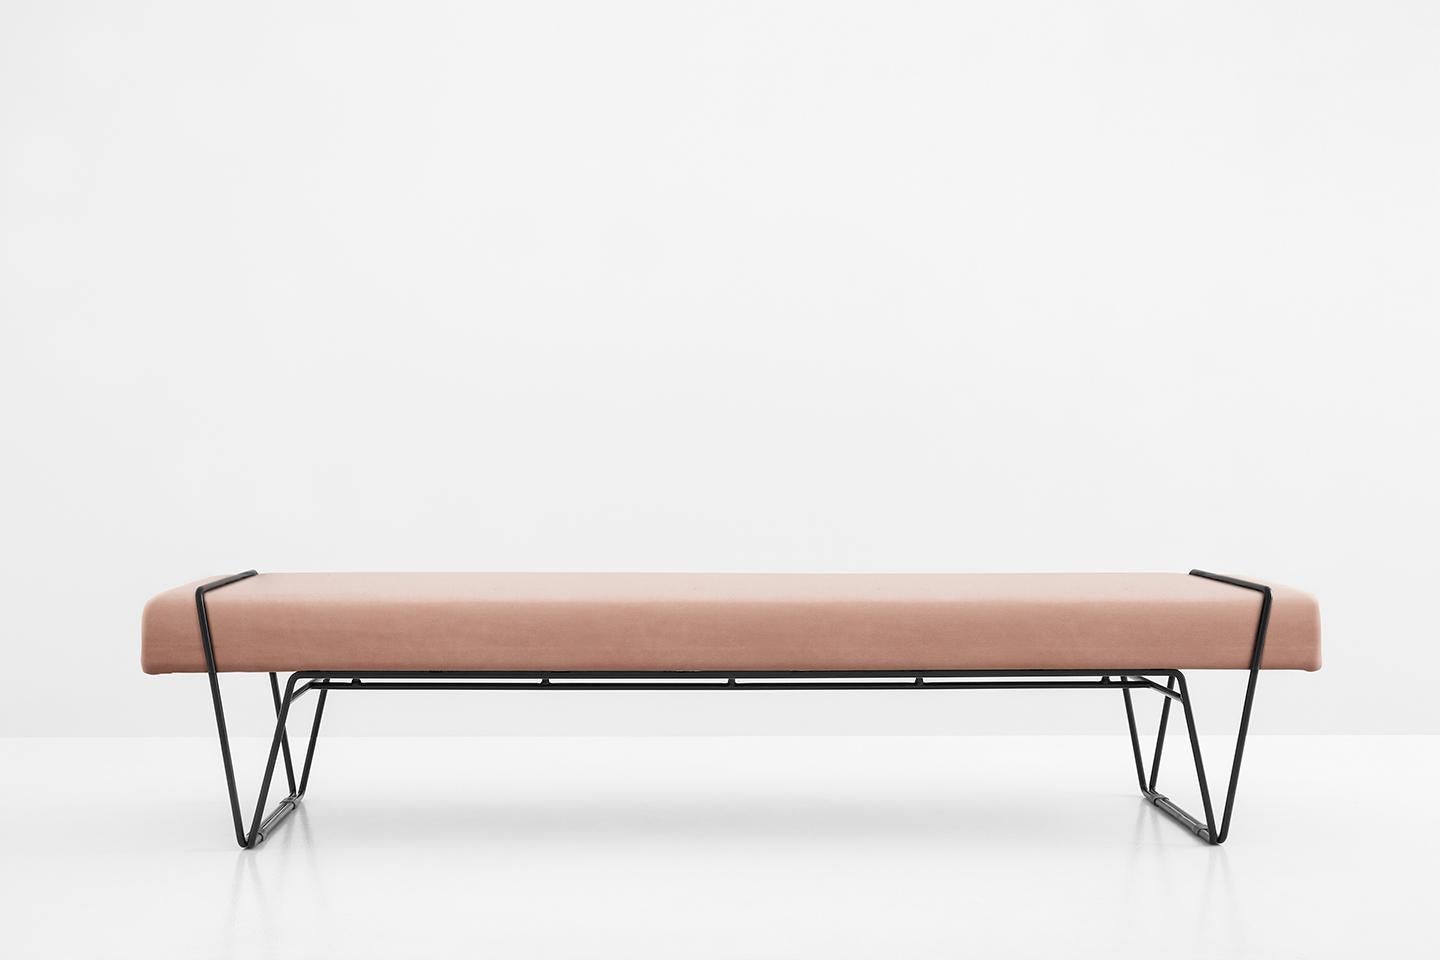 PANCHINA Bench in Painted Metal and Brass Upholstered in Mohair
Bench with a structure in matte black painted metal and oxidized brass details.
Padded in polyurethane foam, upholstered in pink mohair.
Available upon request in: SATIN and